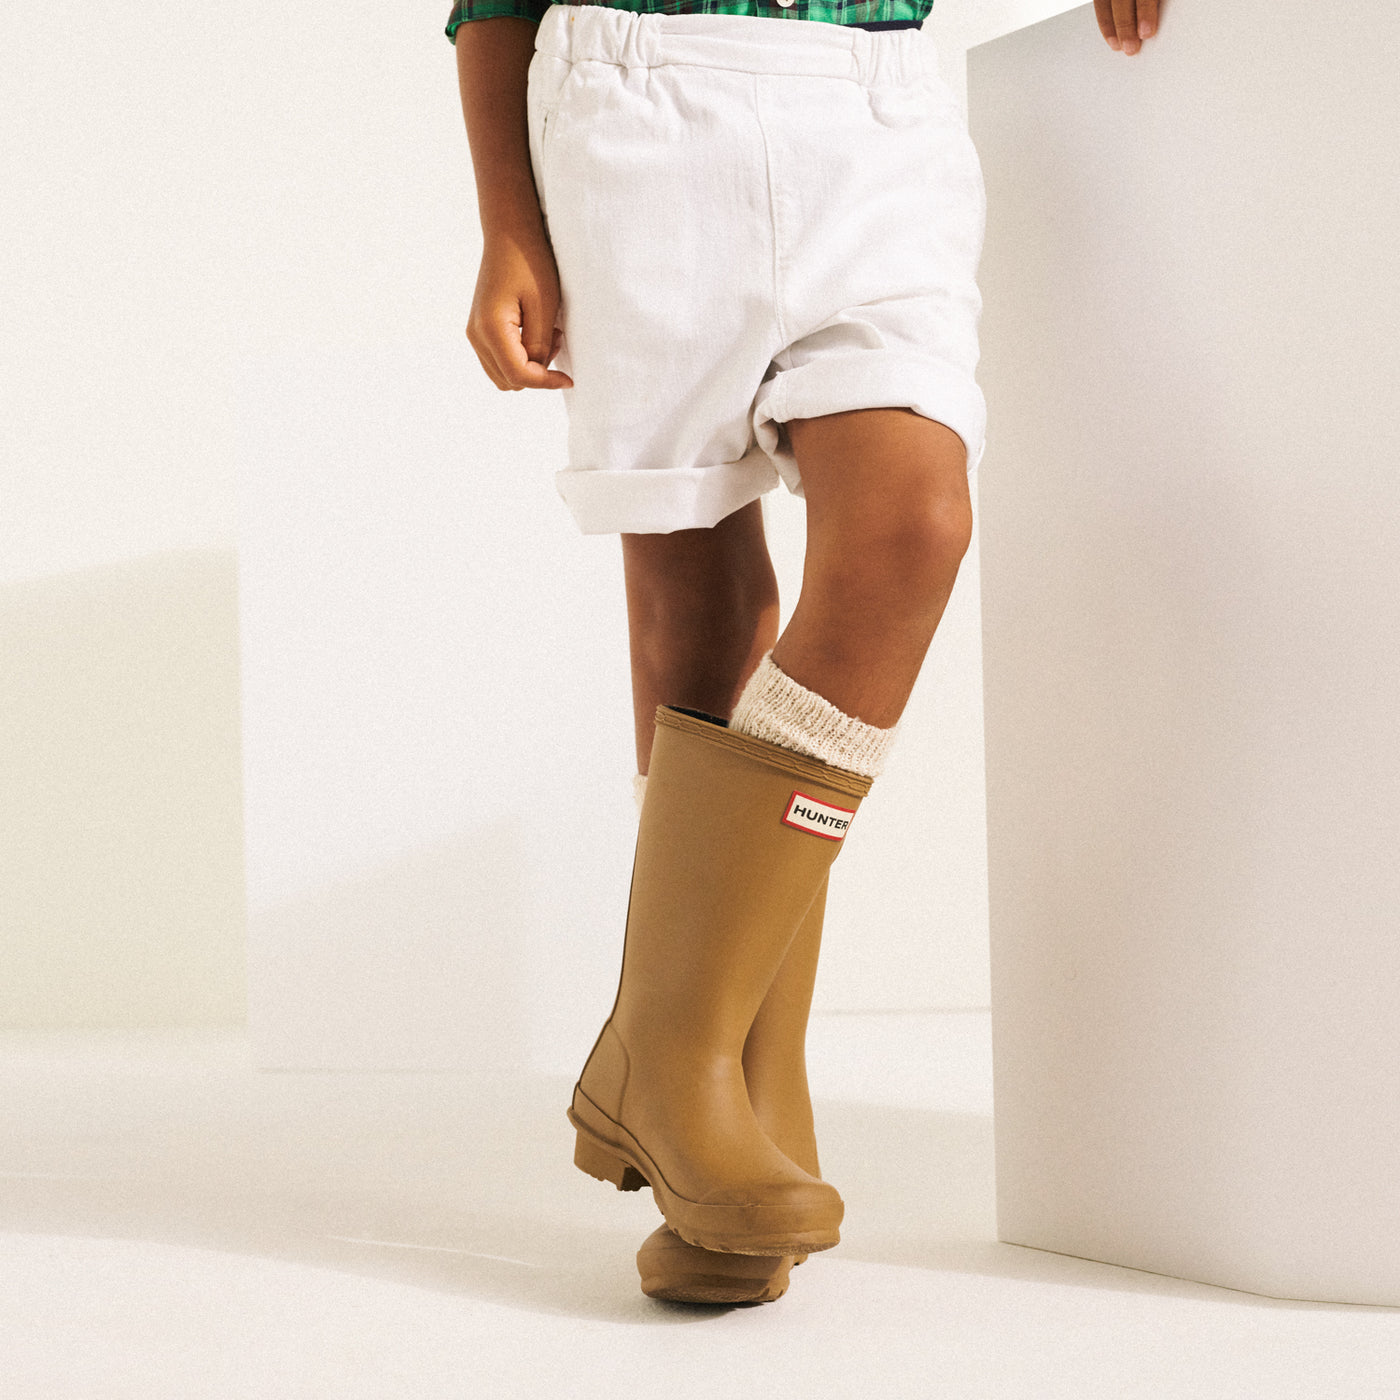 Child legs in white shorts with tan Hunter boots Bonpoint